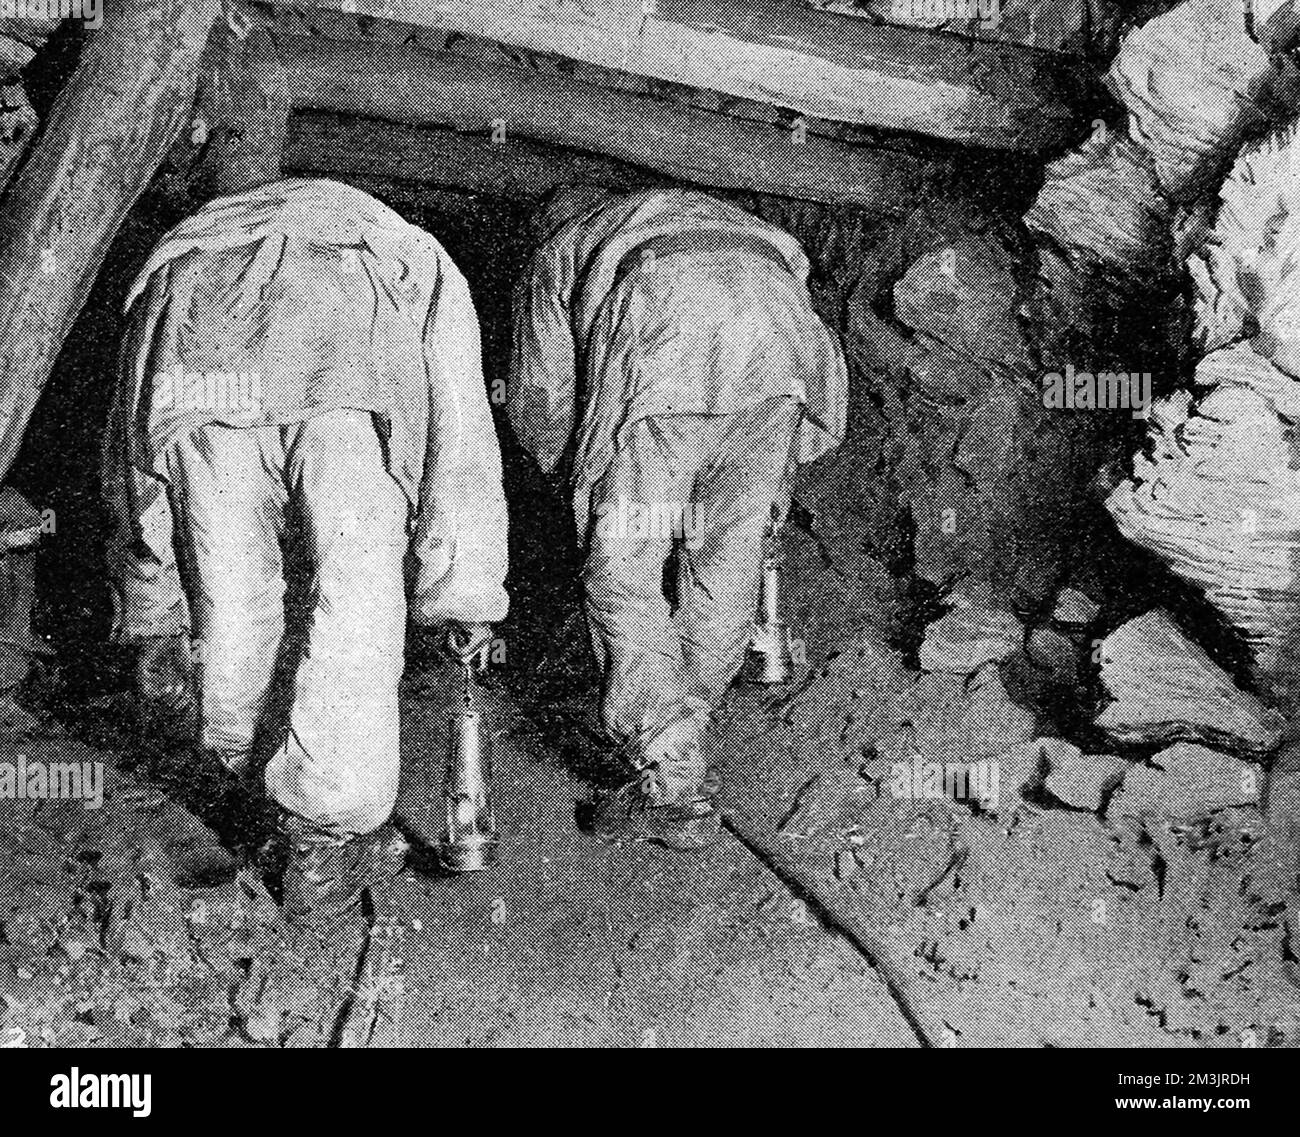 The painful passage of a narrow gallery, the descent into the pits at the Courrieres mines. The colliery disaster at Courrieres mines, 1906, in the Pas de Calais. An explosion in one of the three pits resulted in a unprecedented death toll of 1150 men.     Date: 17th March 1906, p376 Stock Photo